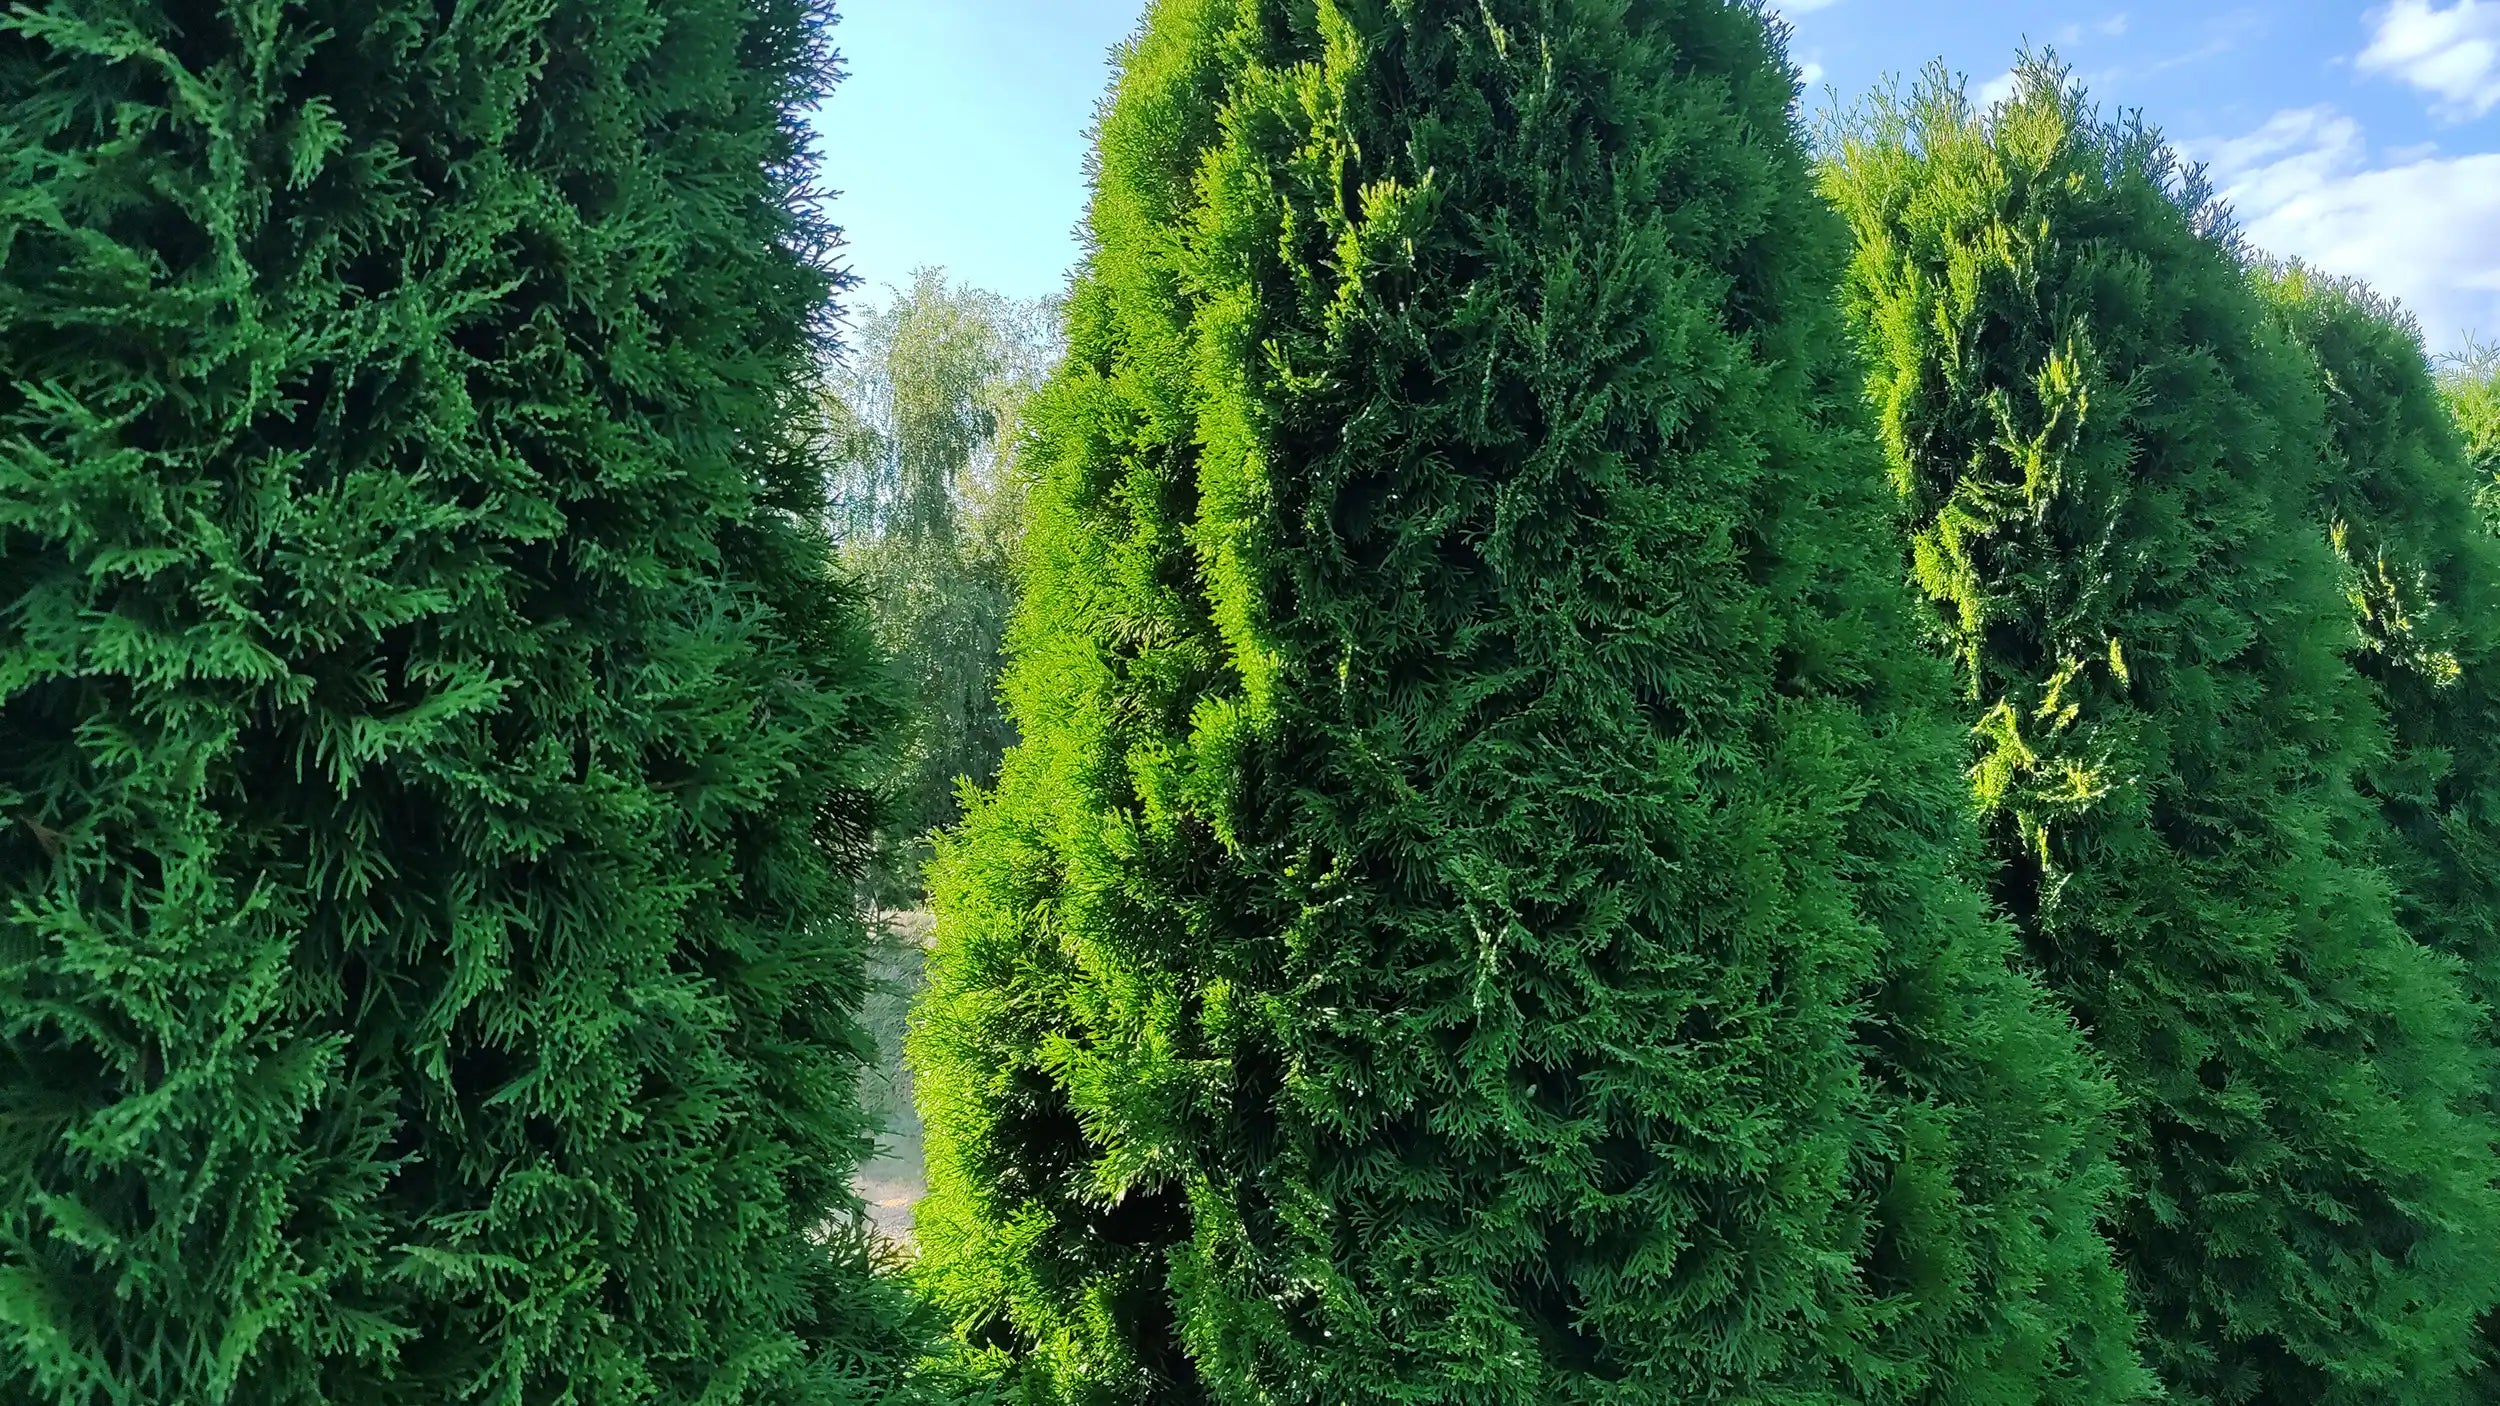 The Green Giant Thuja Evergreens here aren't just healthy and green, they're on their way to 40 feet in height and will provide  privacy and a buffer to noise from traffic and neighbors.